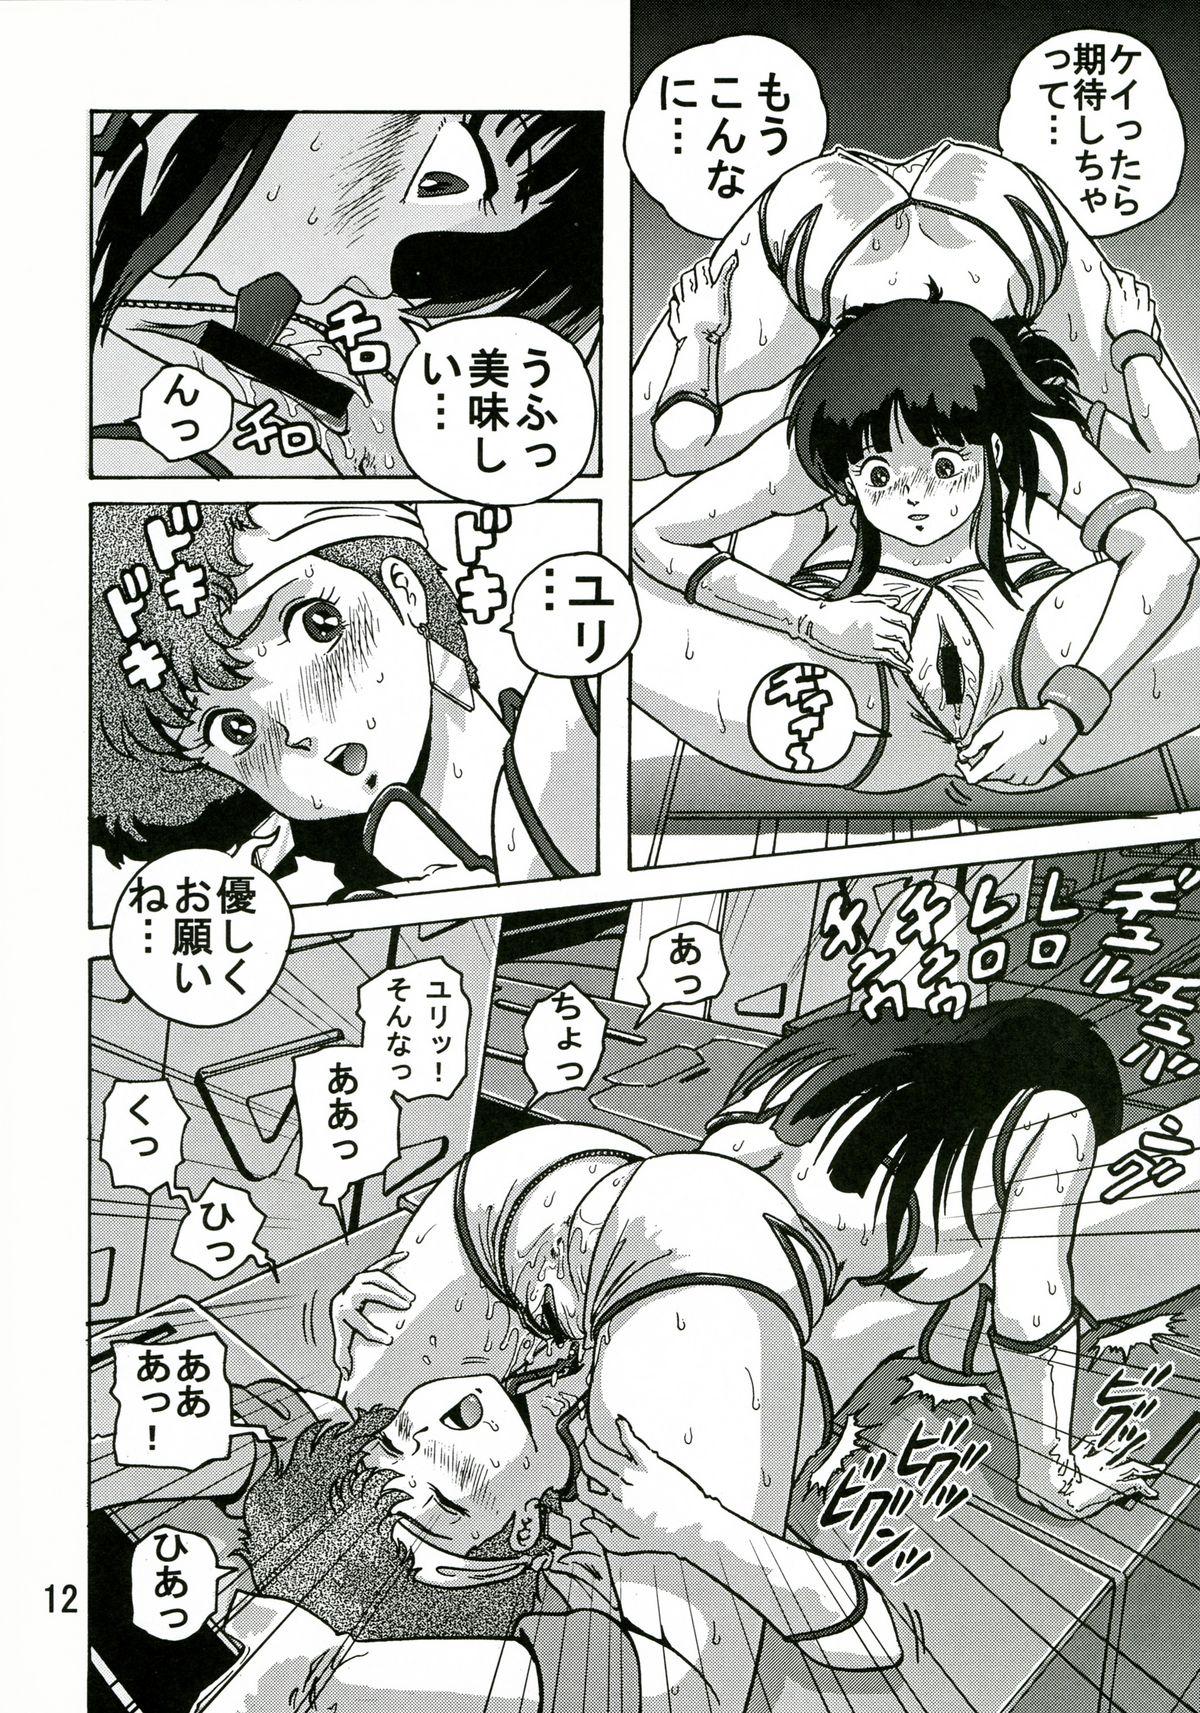 Gay Physicals Love Angel 2 - Dirty pair Homemade - Page 11